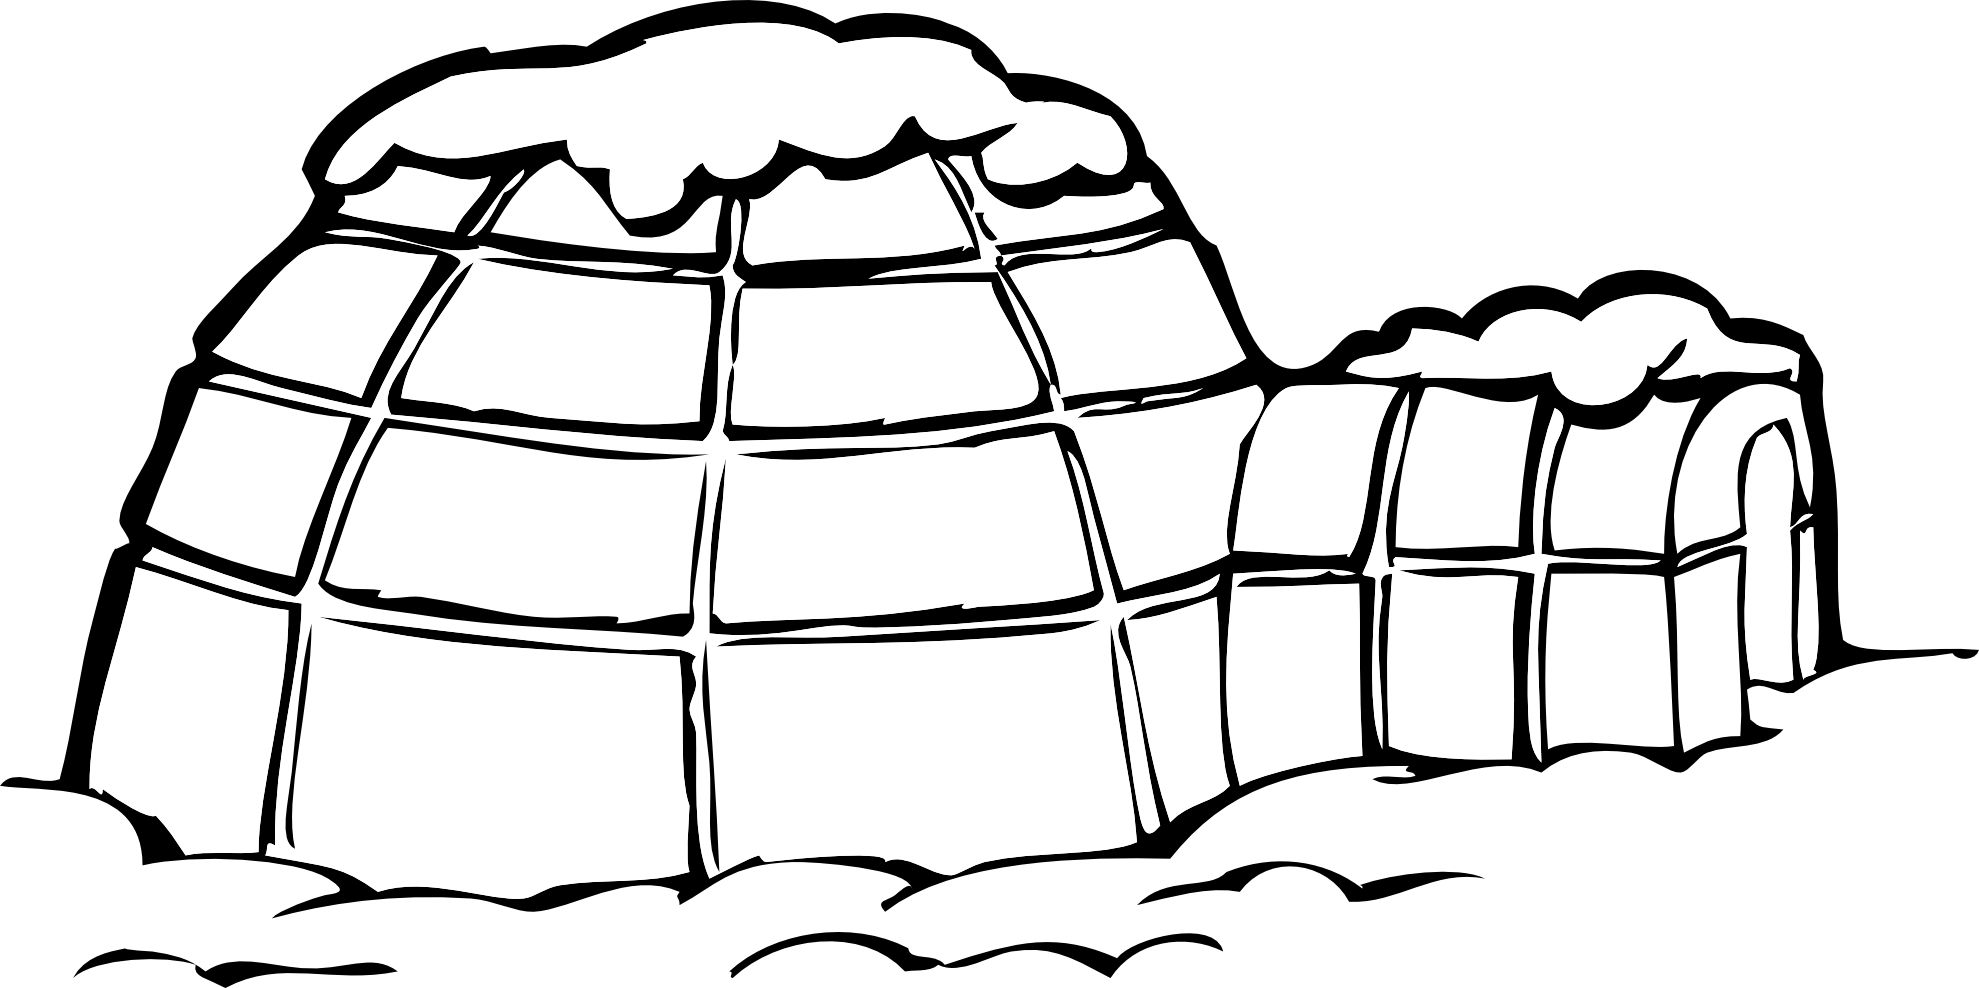 Igloo clipart black and white free images